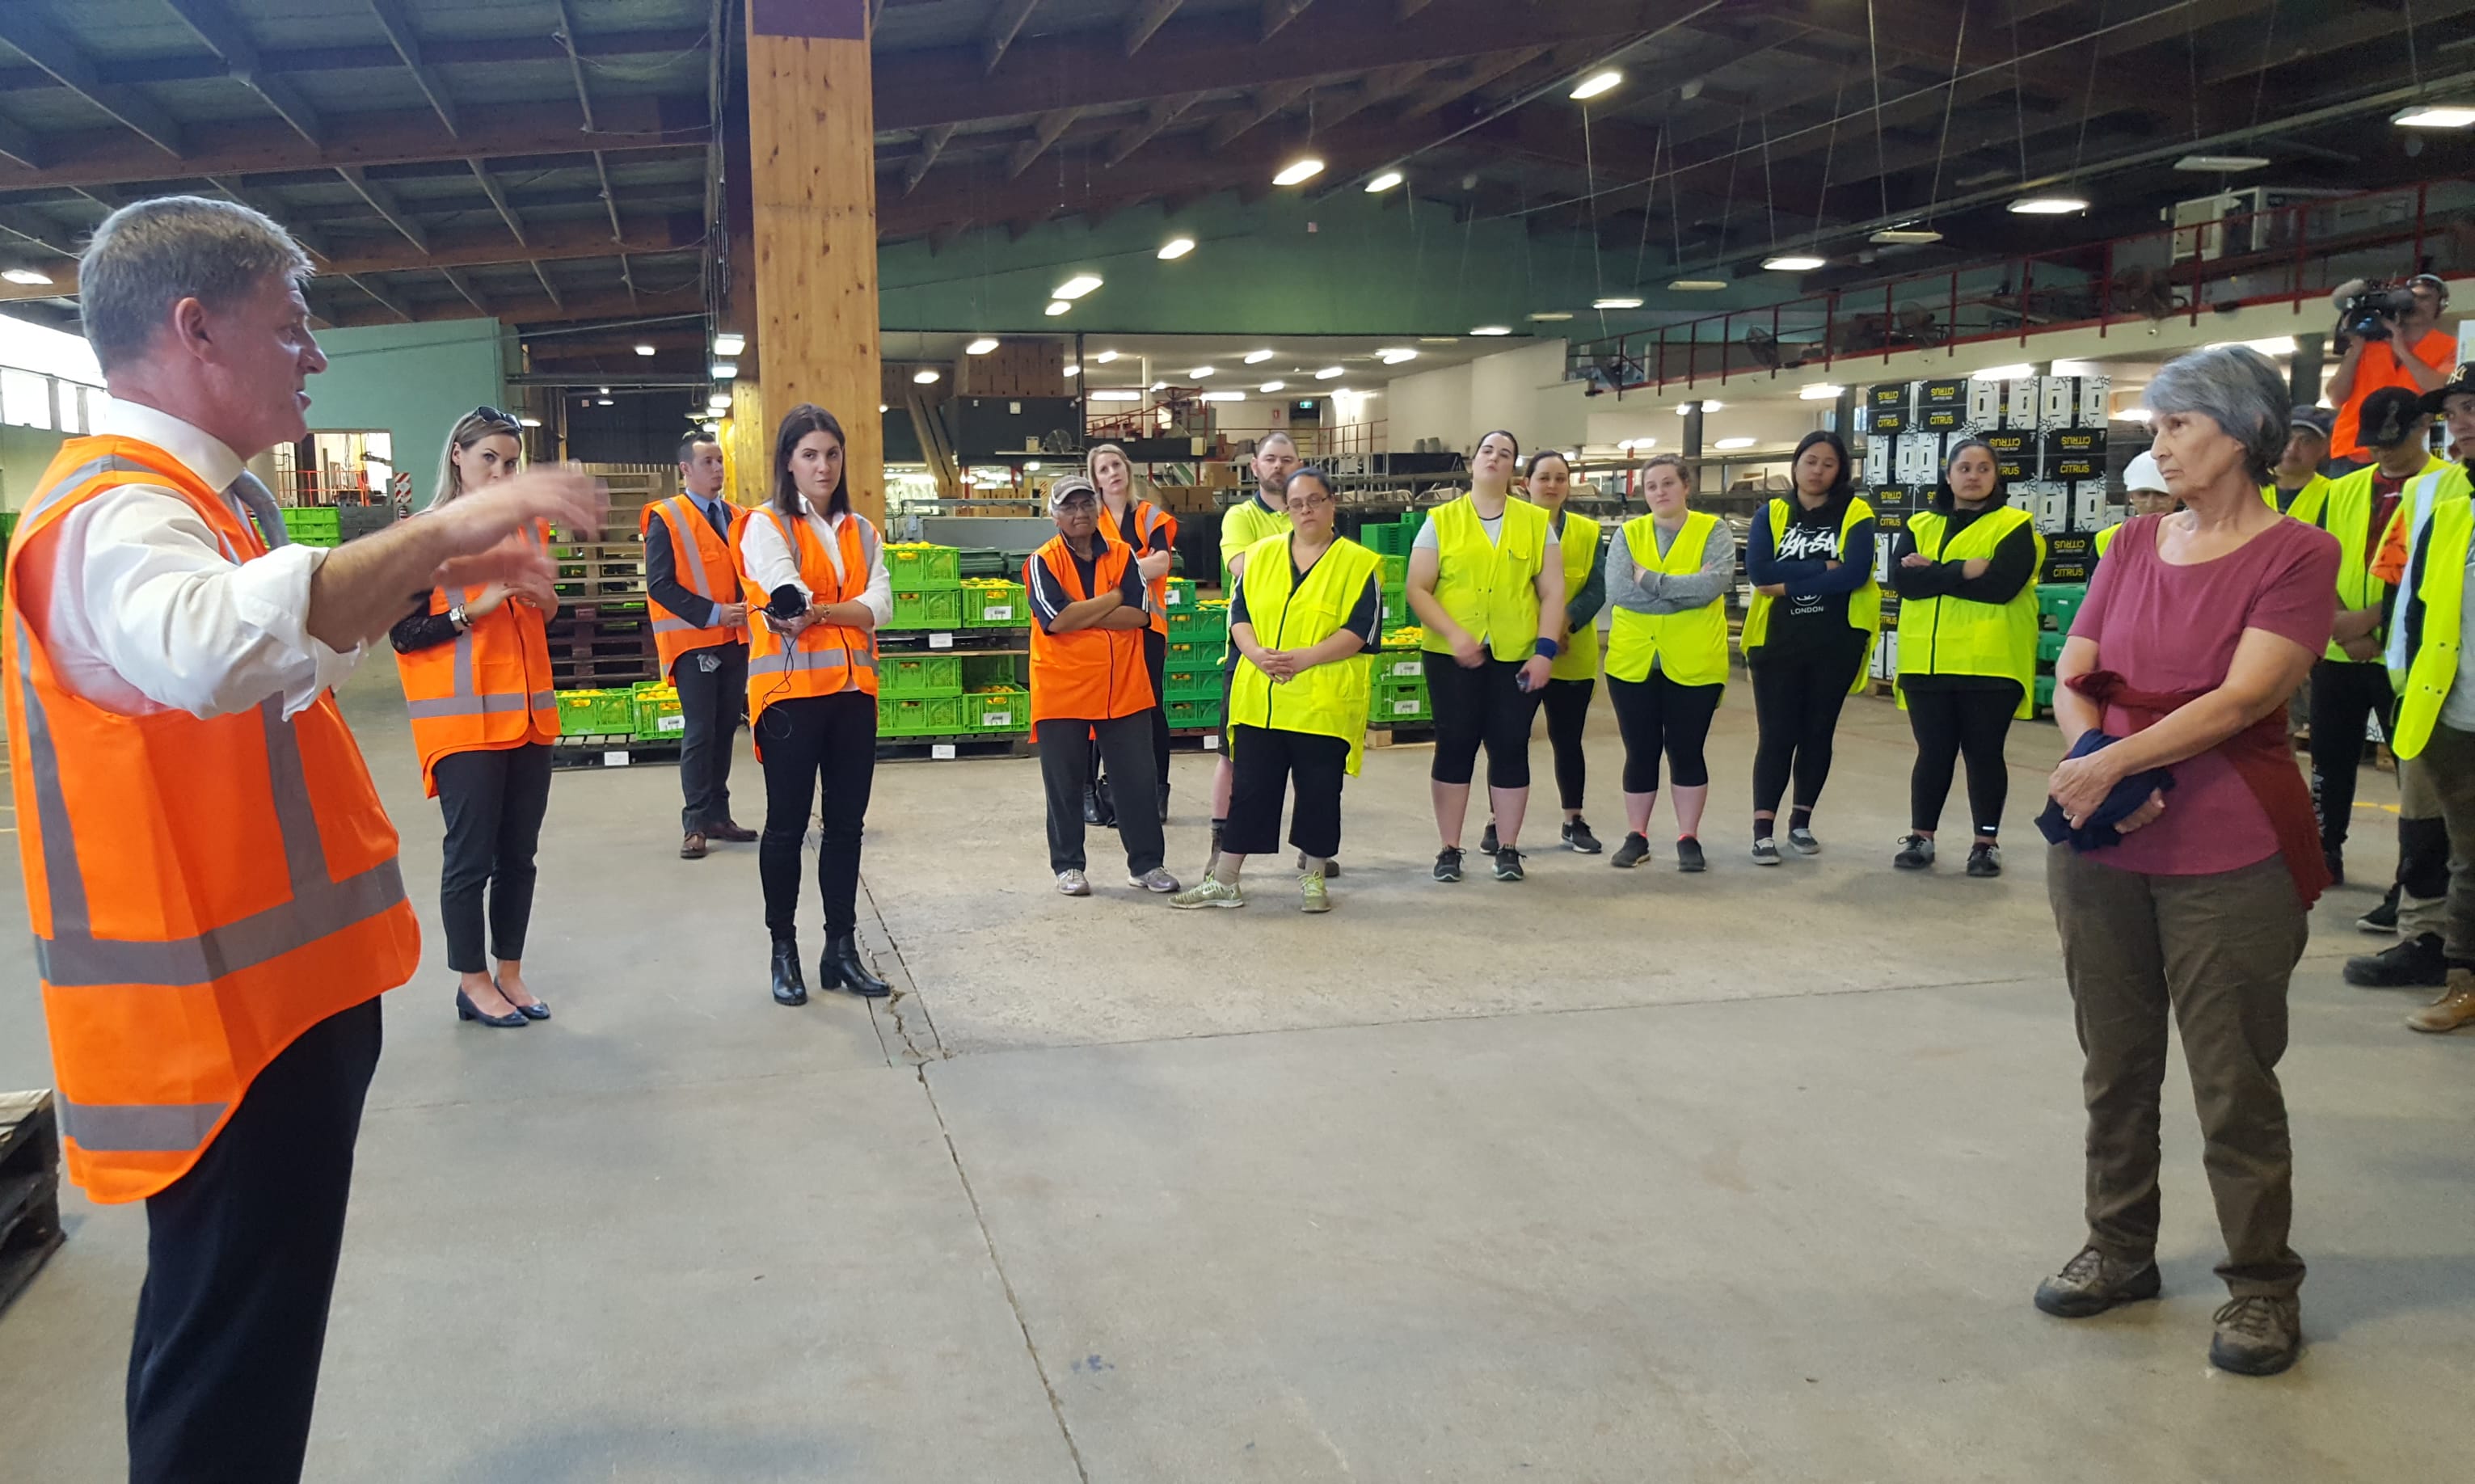 Packhouse worker Robyn Lane was unimpressed with National leader Bill English's answers during his visit to her Gisborne workplace